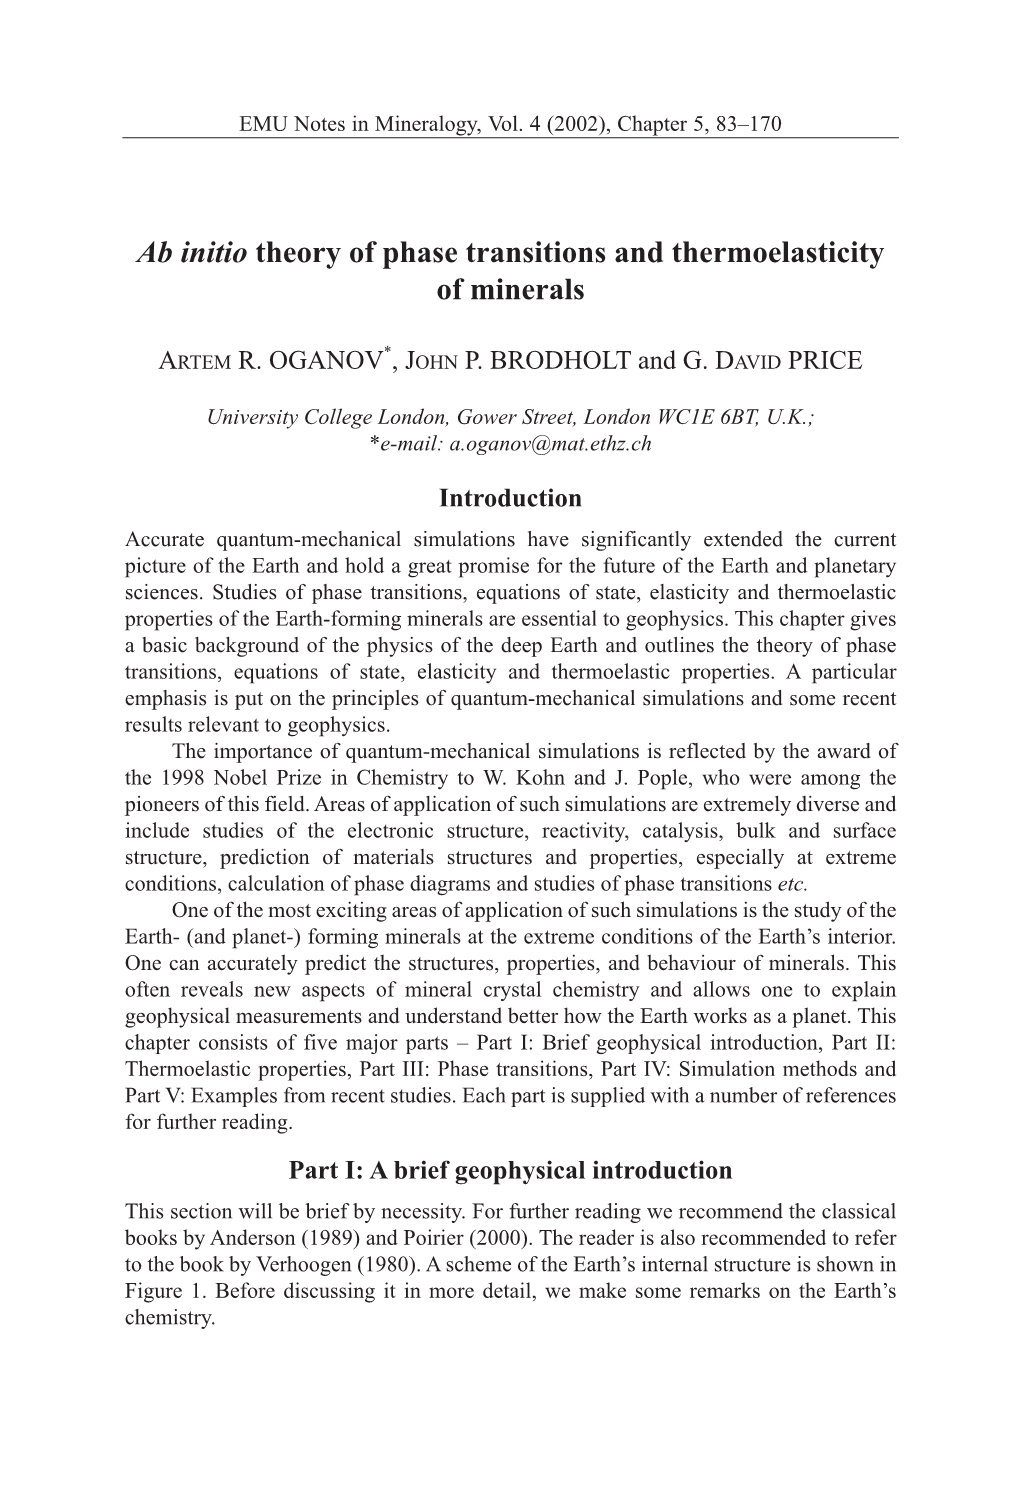 Ab Initio Theory of Phase Transitions and Thermoelasticity of Minerals